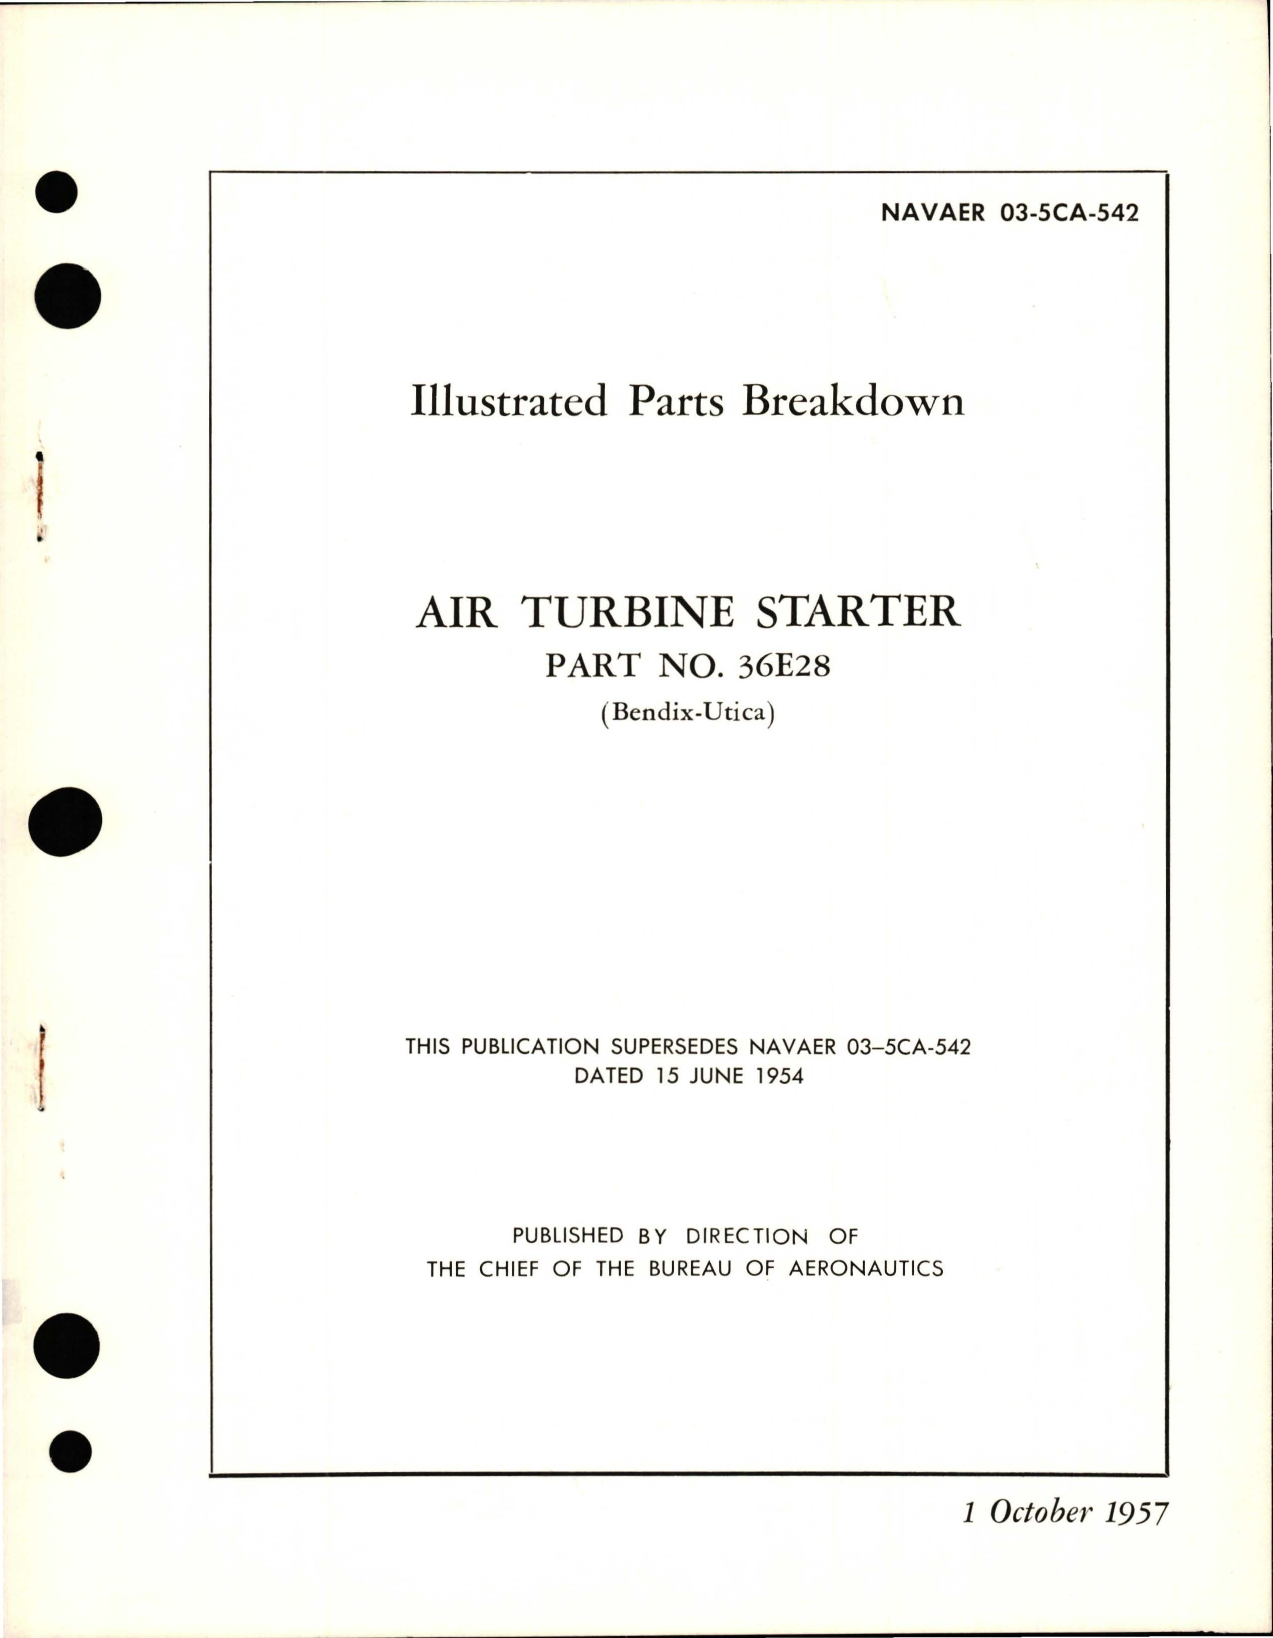 Sample page 1 from AirCorps Library document: Illustrated Parts Breakdown for Air Turbine Starter - Part 36E28